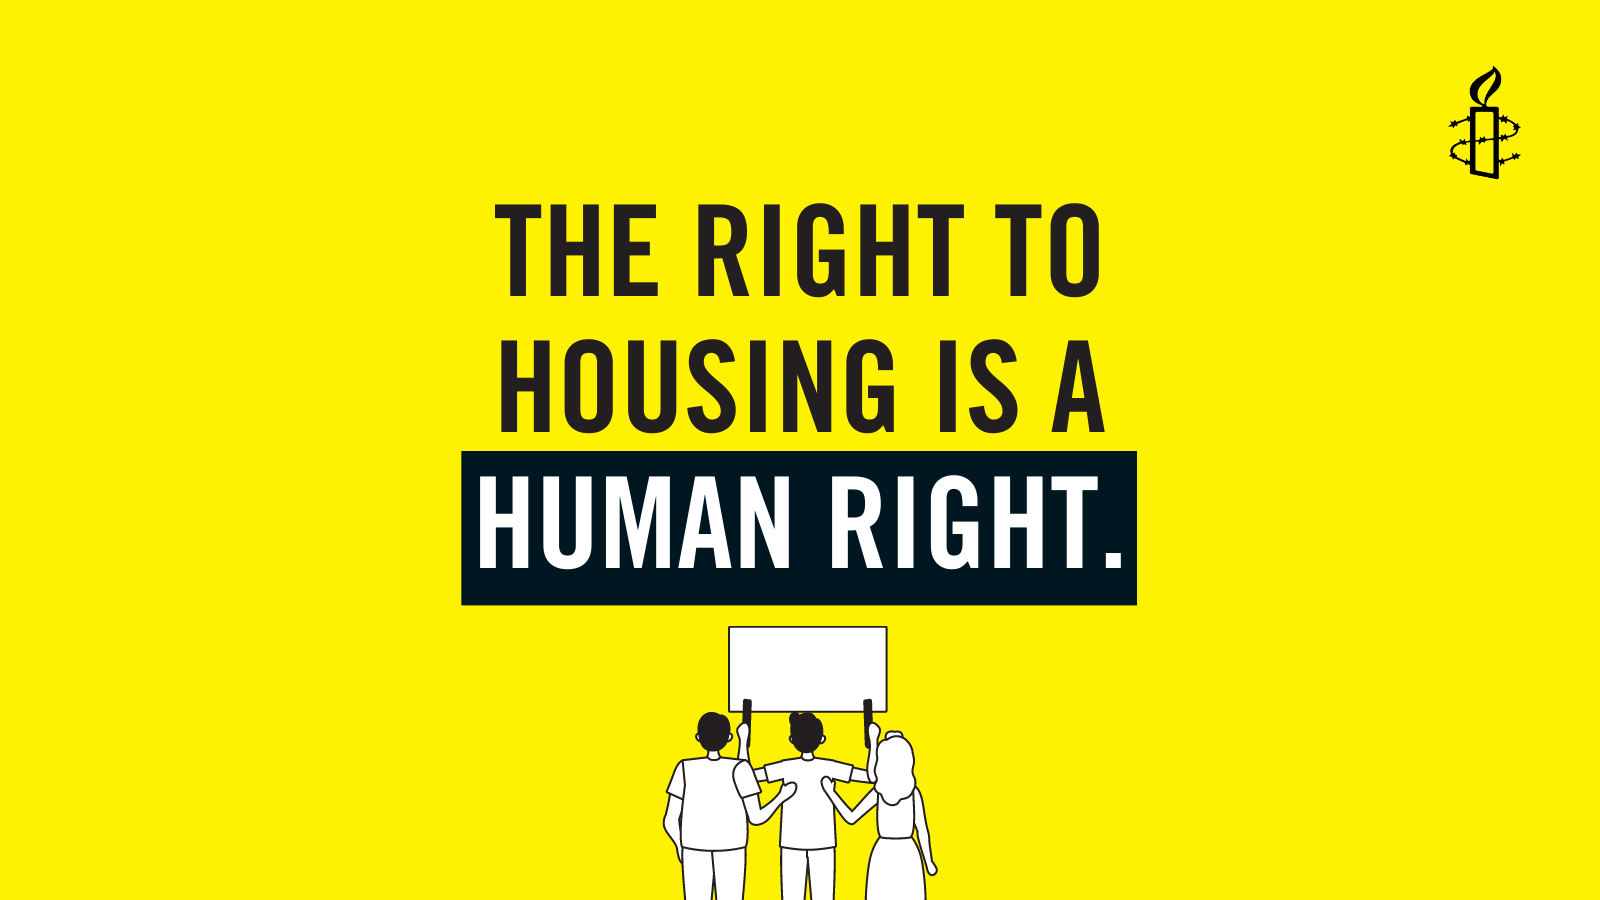 "Image with an illustration of a family holding a placard. The main text reads: the right to housing is a human right."